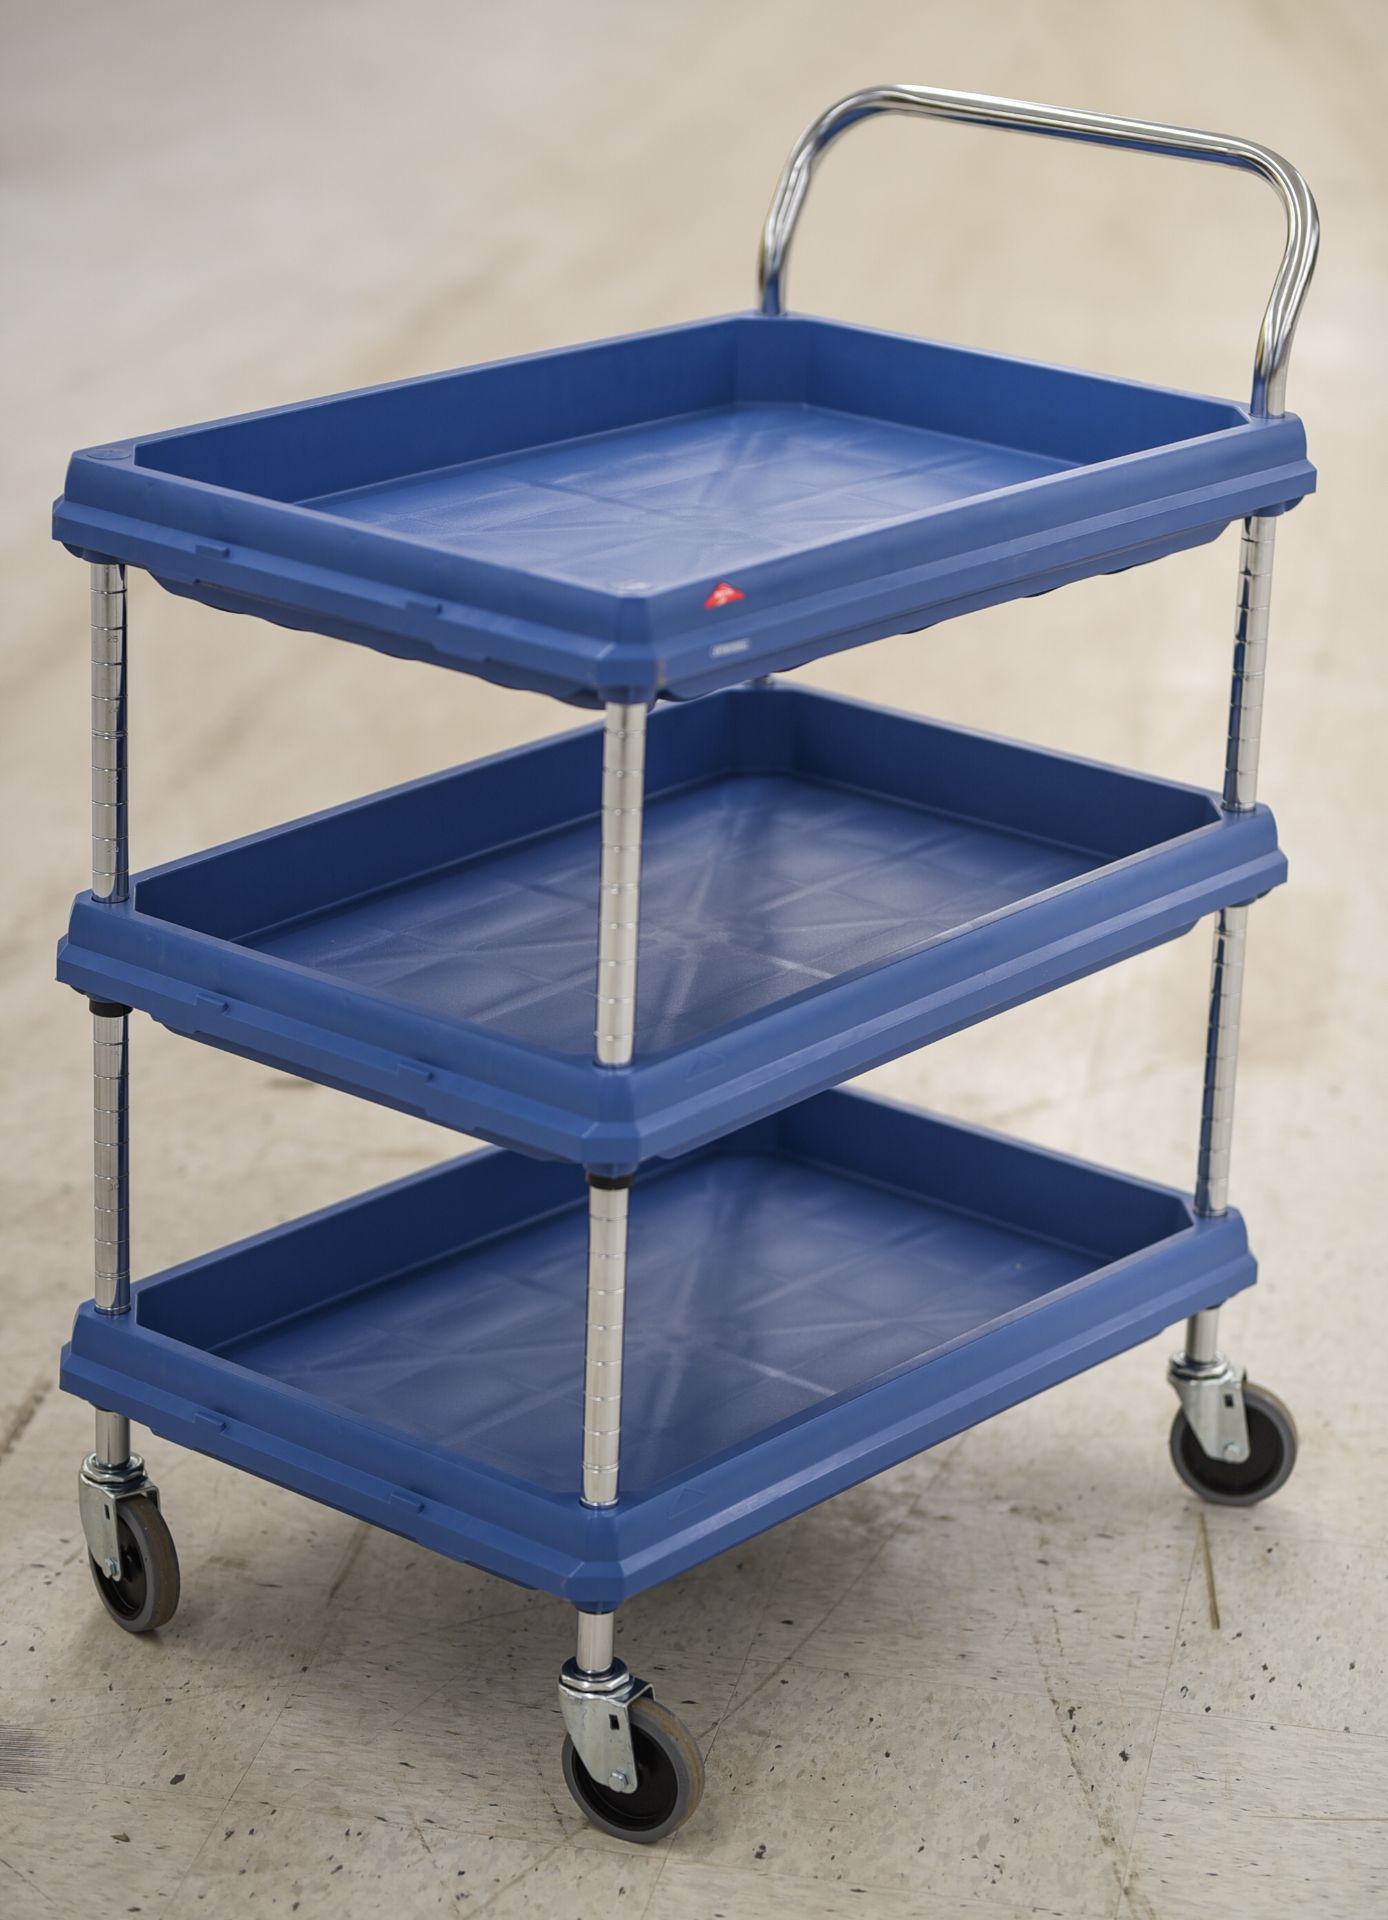 Metro Antimicrobial 3-Tier Rolling Cart - Image 2 of 3